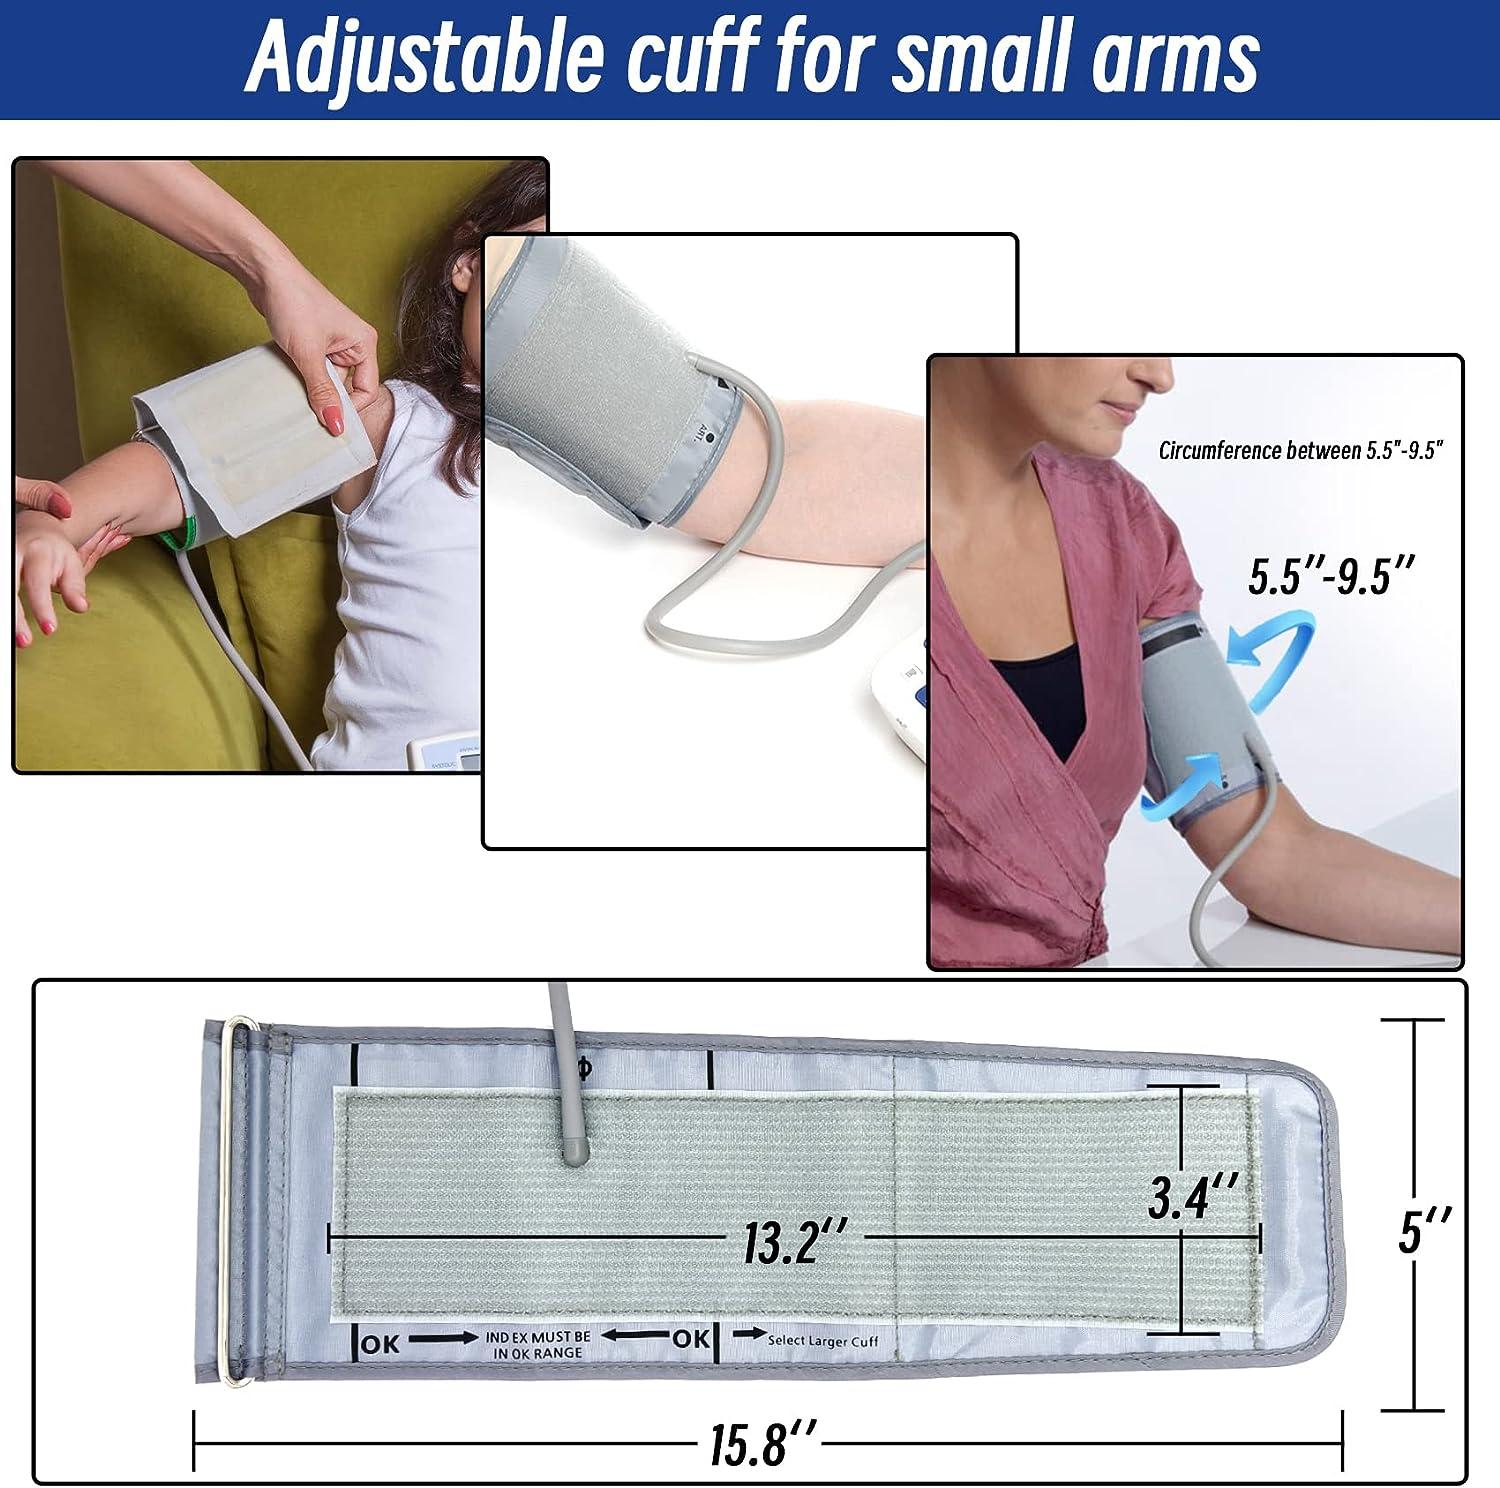 Small Blood Pressure Cuff, ELERA Replacement Small Cuff Applicable for  5.9”-9.5” (15-24CM) Small Arm, Cuff Only BP Machine Not Included